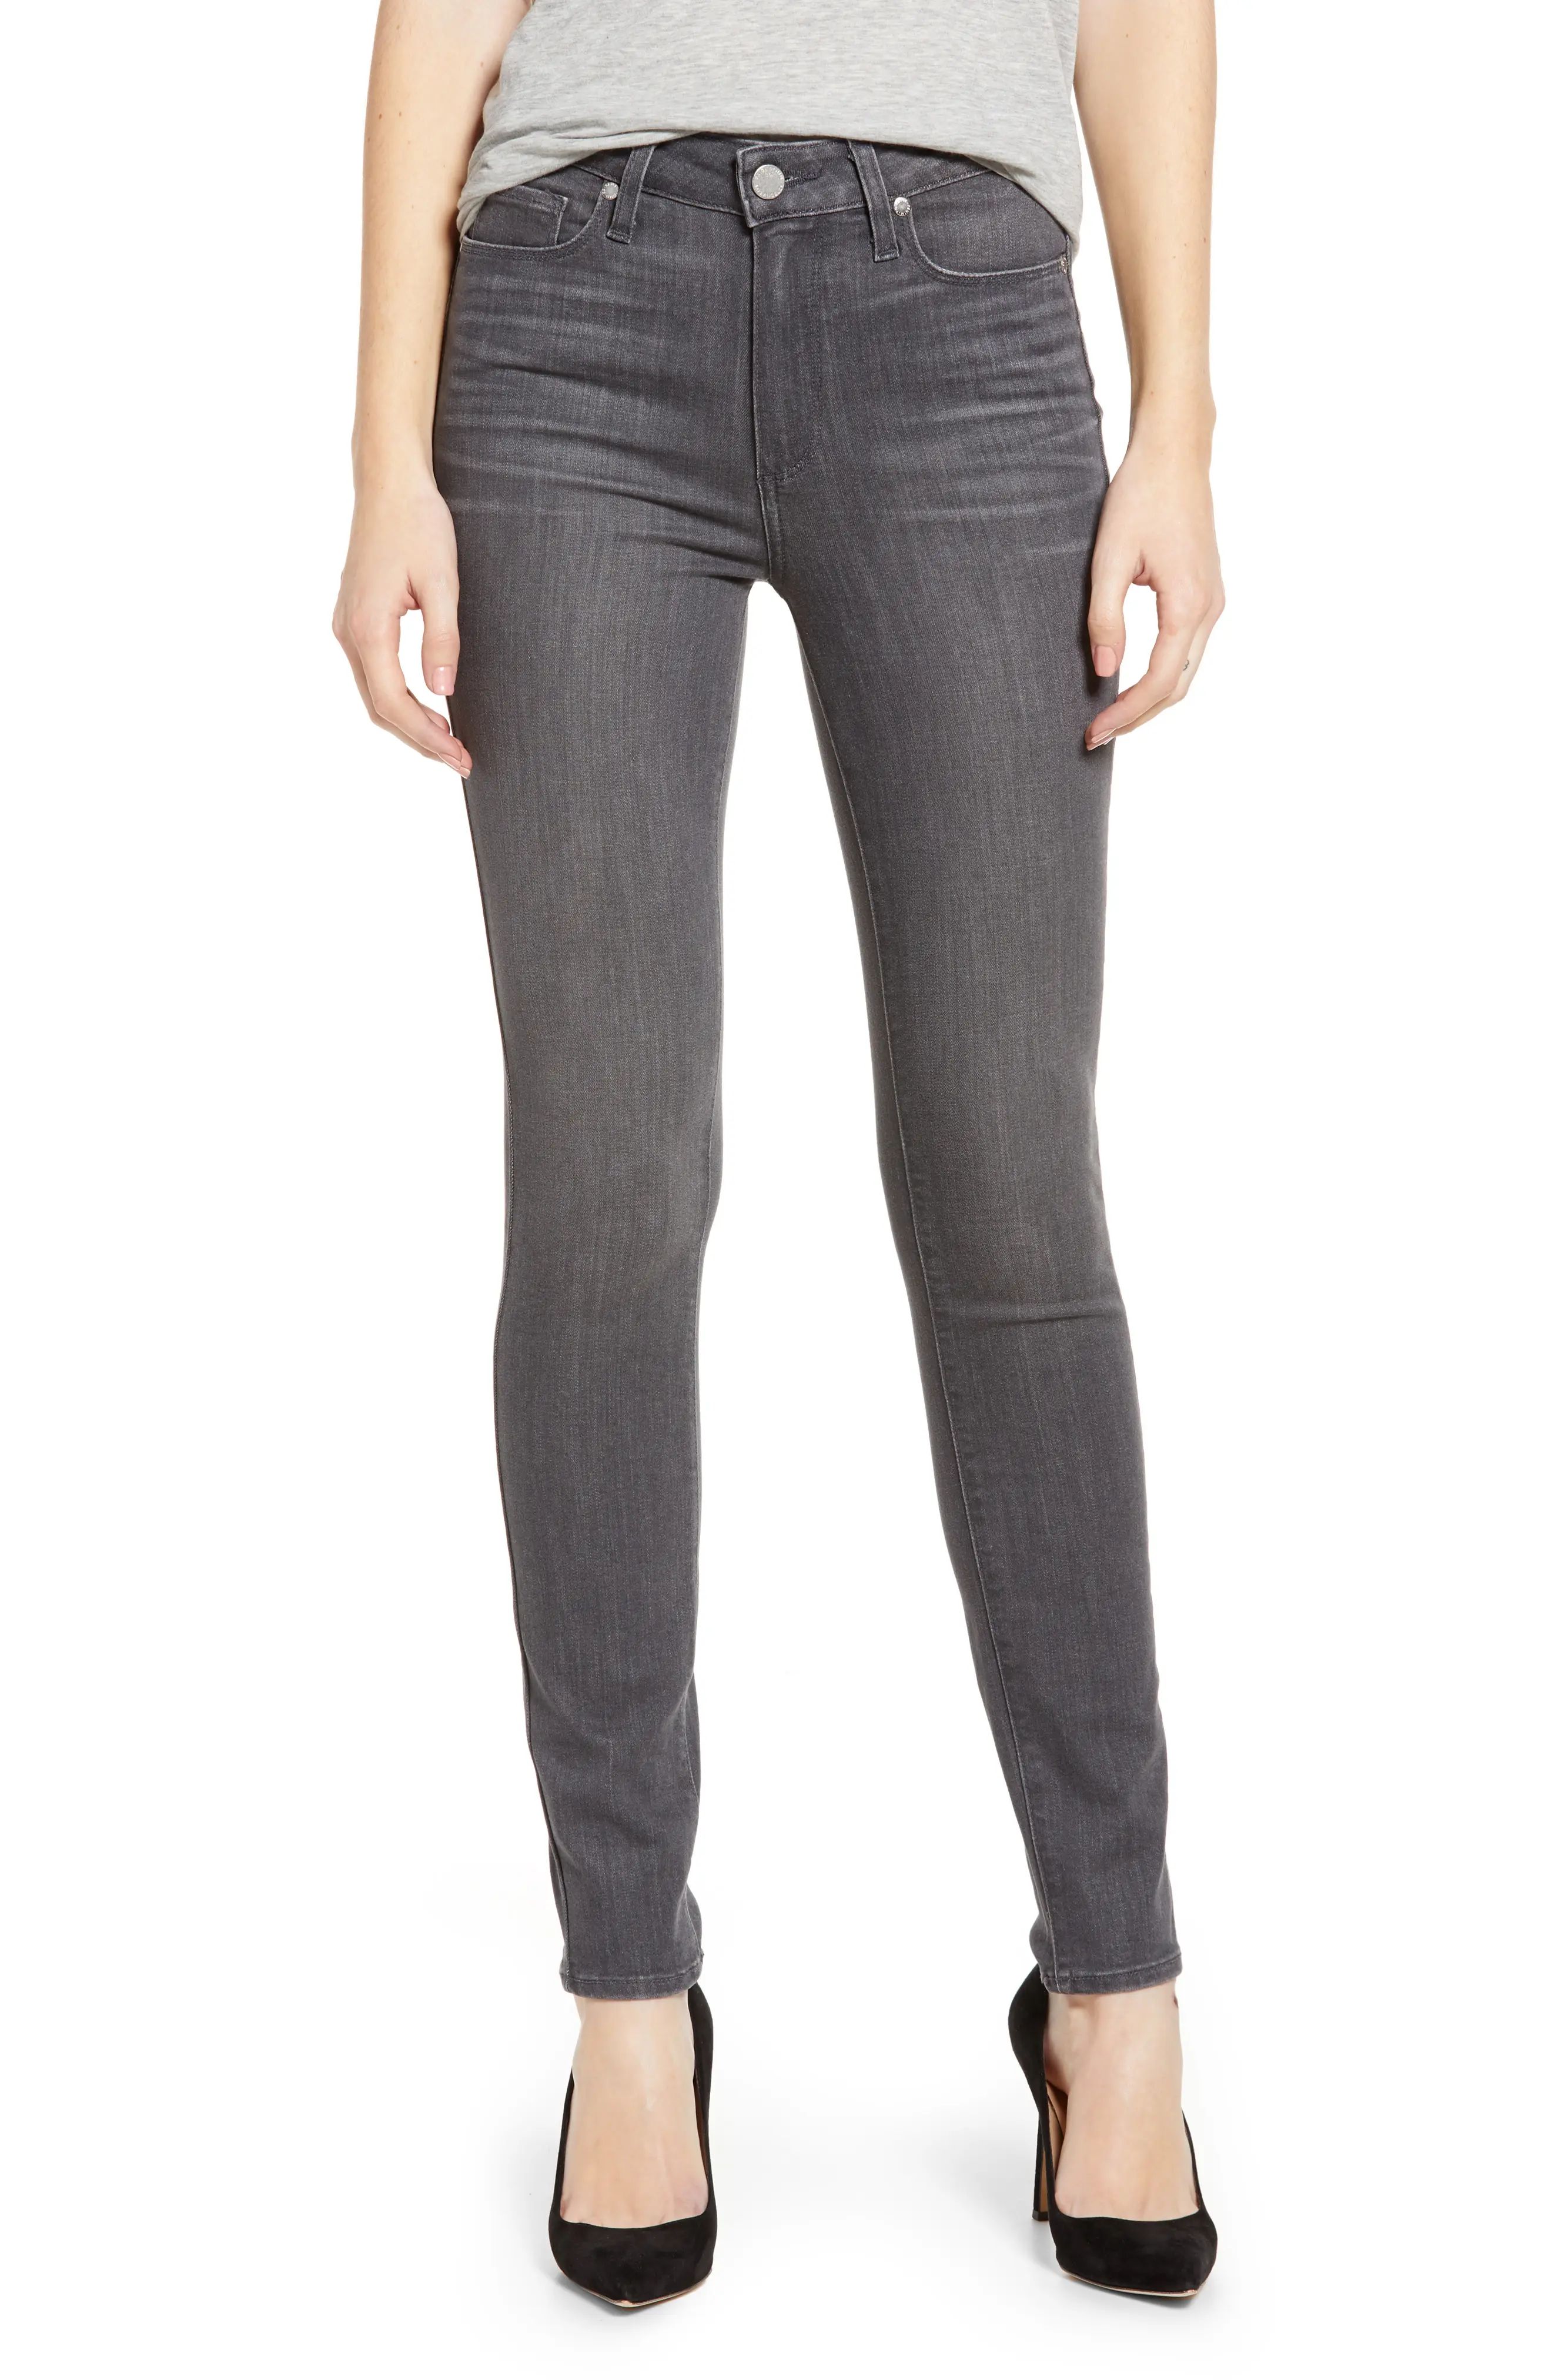 Women's Paige Hoxton Transcend High Waist Skinny Jeans, Size 24 - Grey | Nordstrom